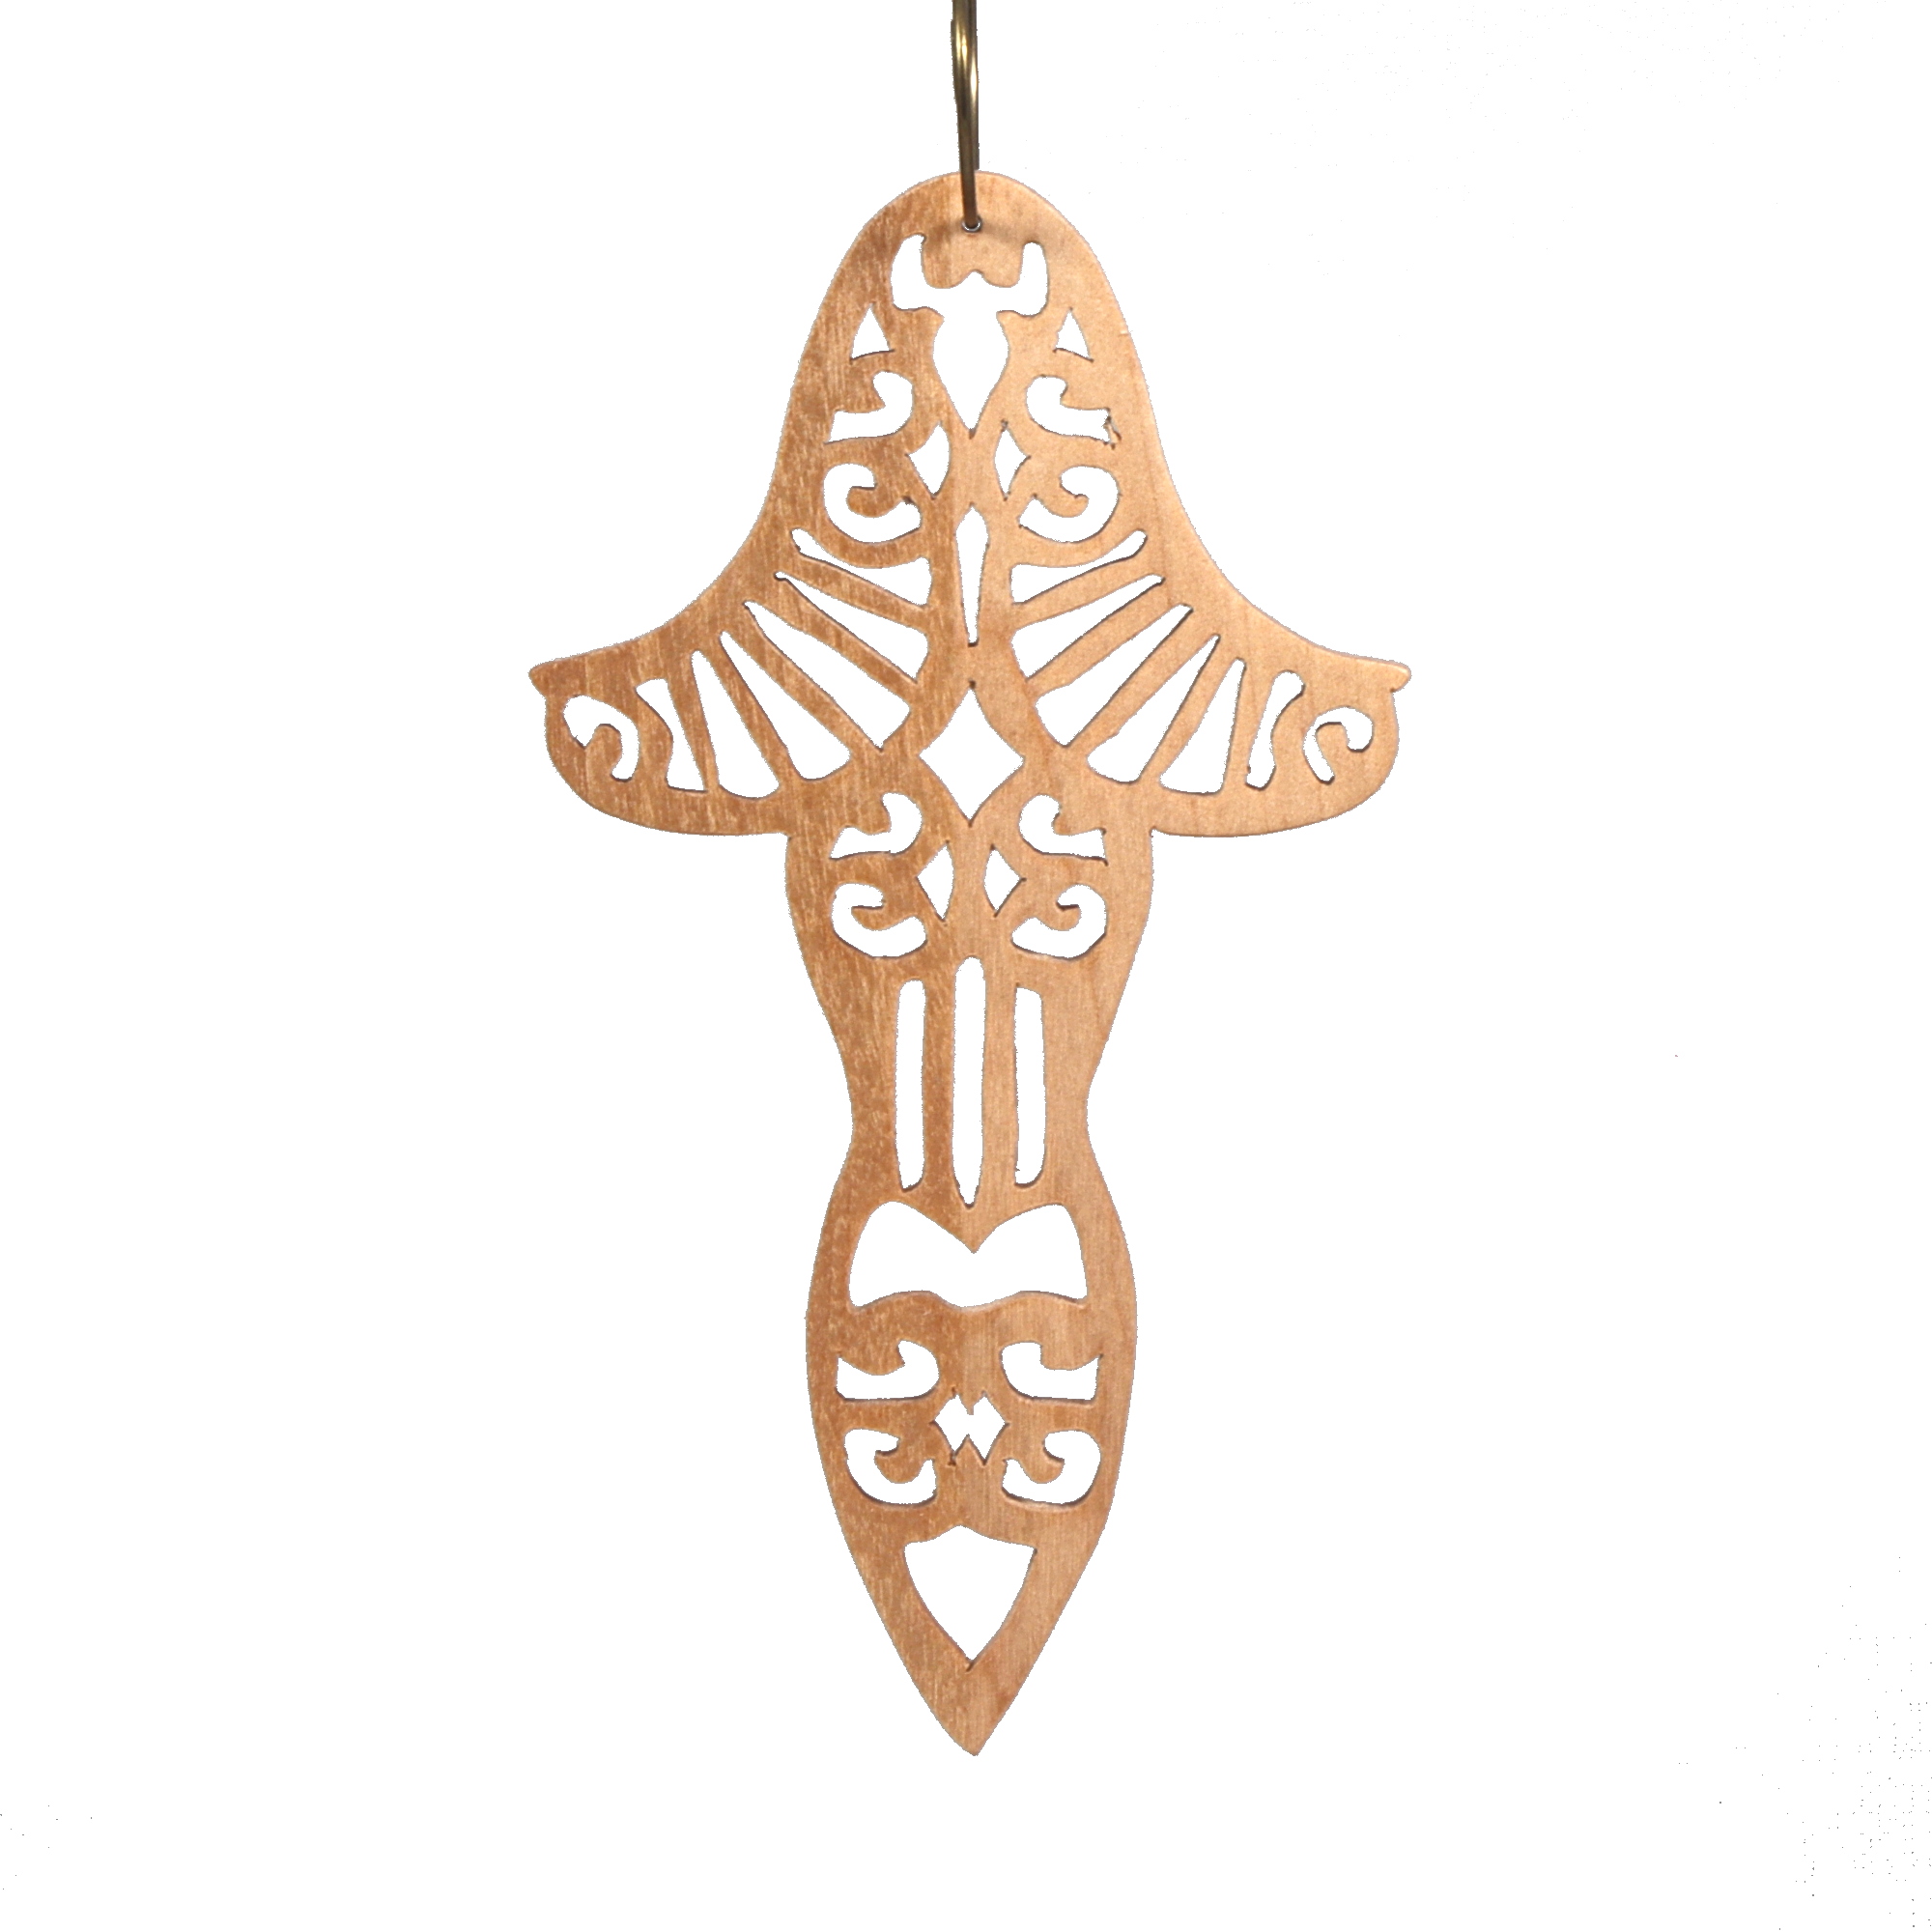 Handmade Wood Fretwork Victorian Icicle style Christmas tree ornament hand finished with clear shellac.